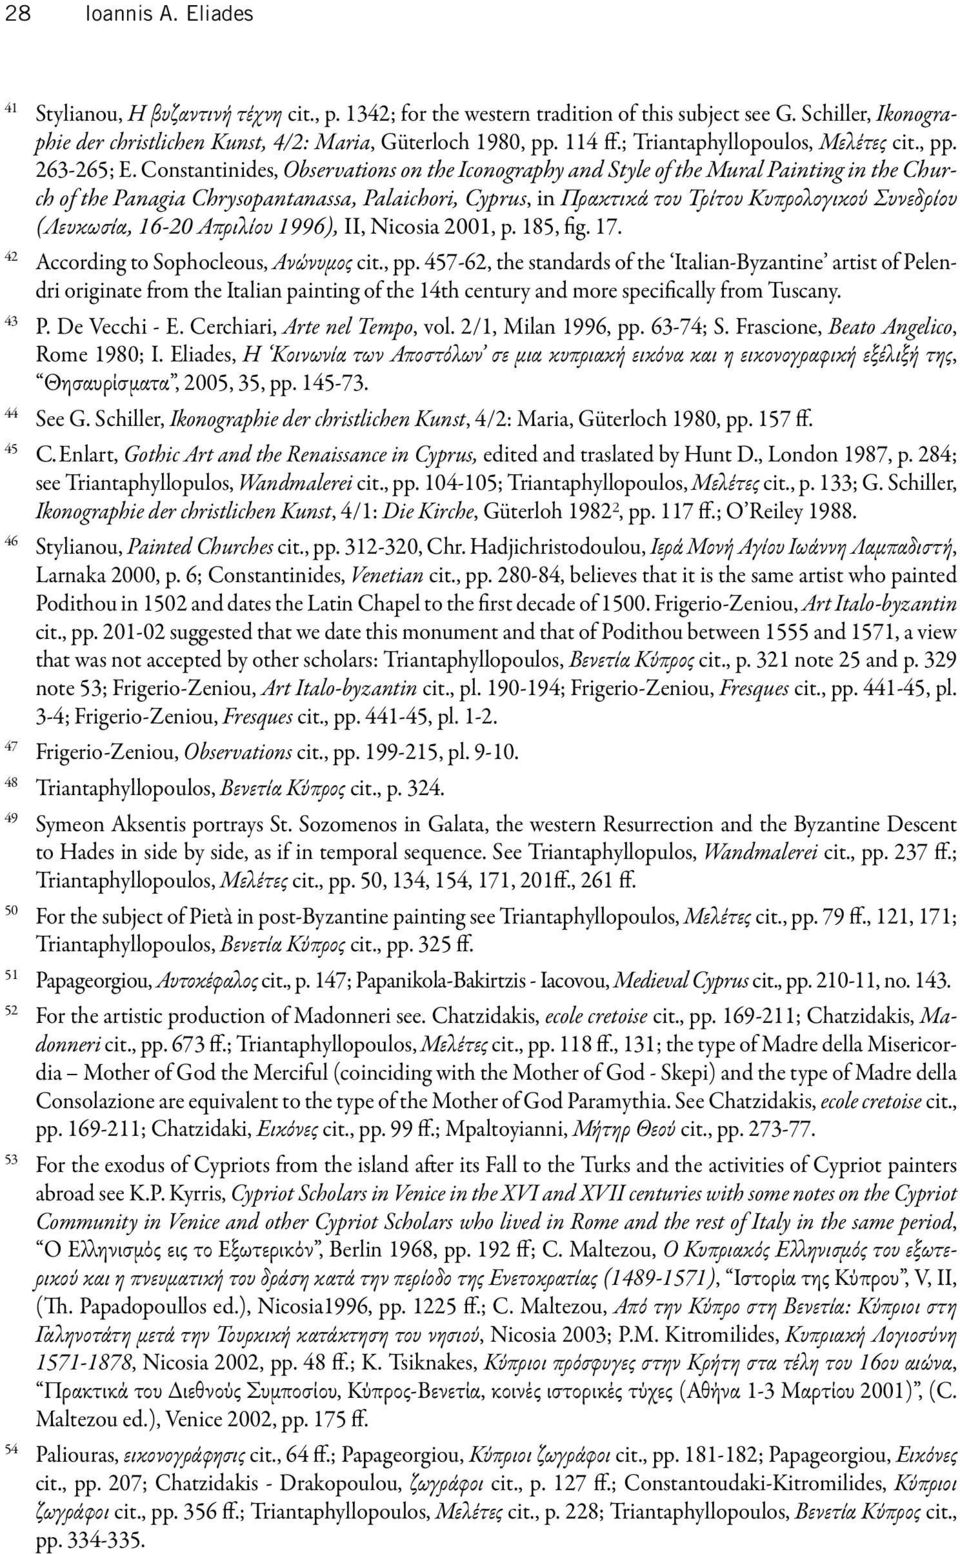 Constantinides, Observations on the Iconography and Style of the Mural Painting in the Church of the Panagia Chrysopantanassa, Palaichori, Cyprus, in Πρακτικά του Τρίτου Κυπρολογικού Συνεδρίου